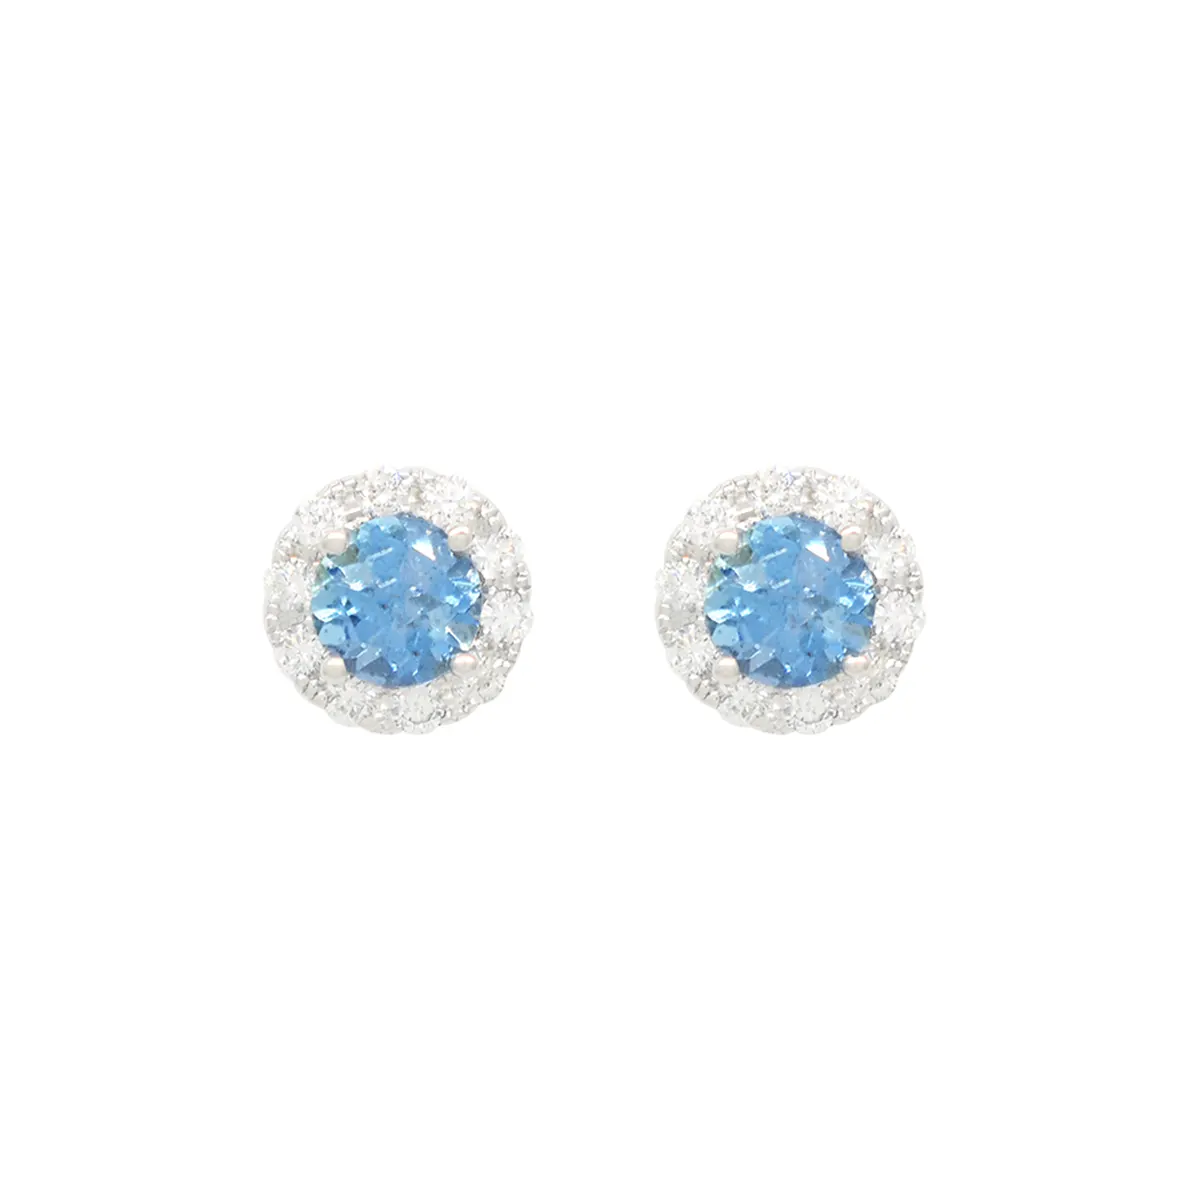 Aquamarine and diamond stud earrings in white gold with 0.46 Ct. t. w. in 2 natural aquamarines and 0.18 Ct. t.w. in 20 genuine diamonds